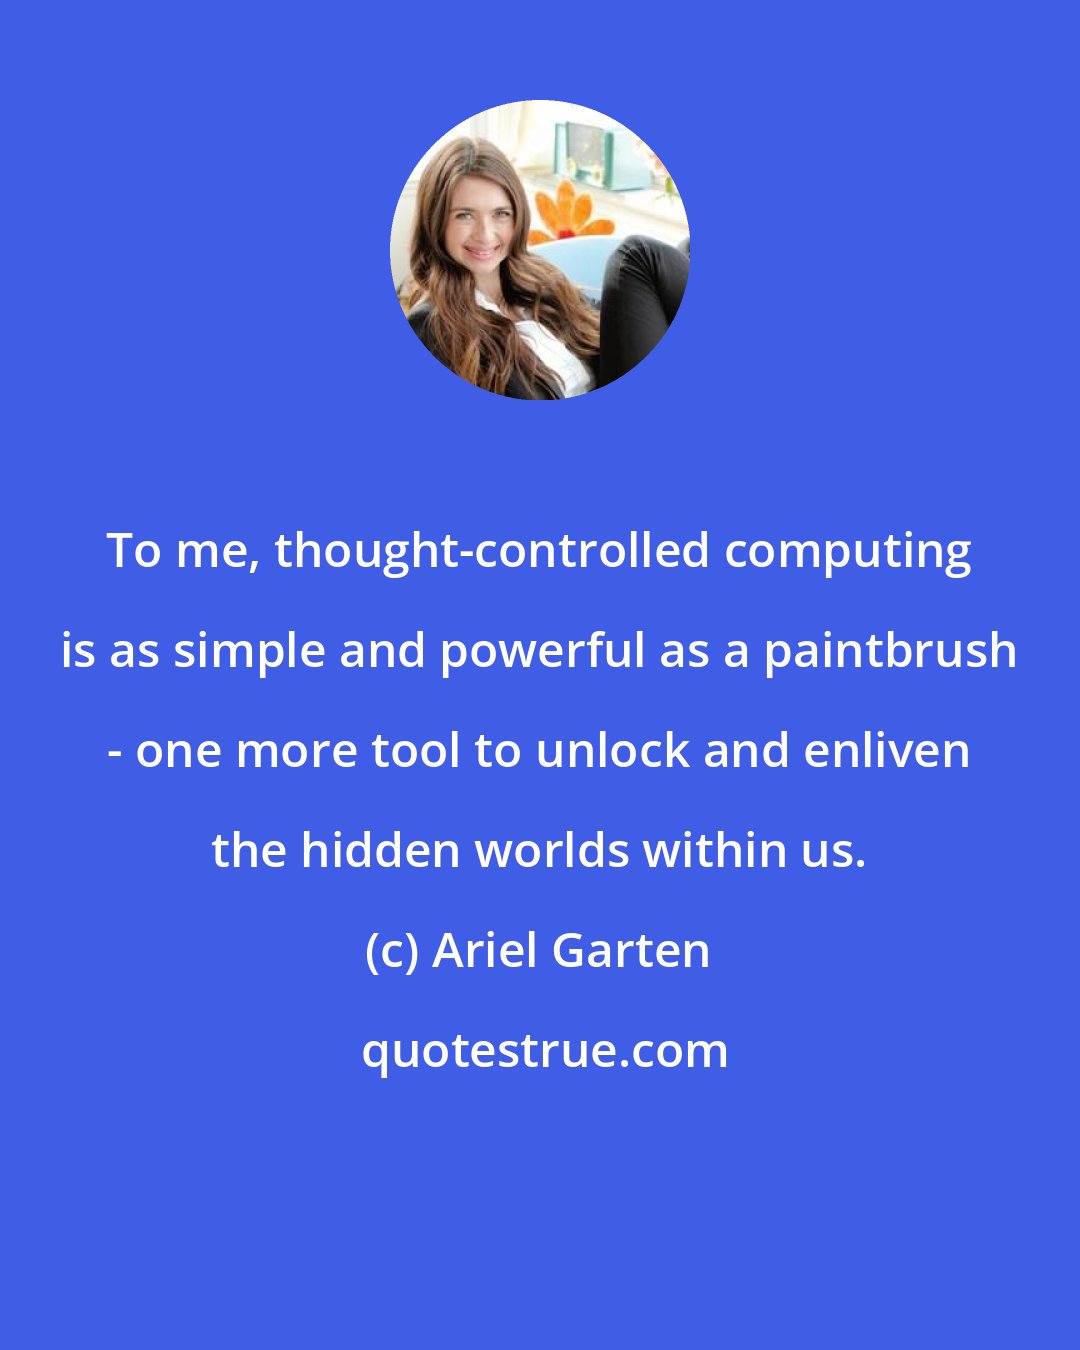 Ariel Garten: To me, thought-controlled computing is as simple and powerful as a paintbrush - one more tool to unlock and enliven the hidden worlds within us.